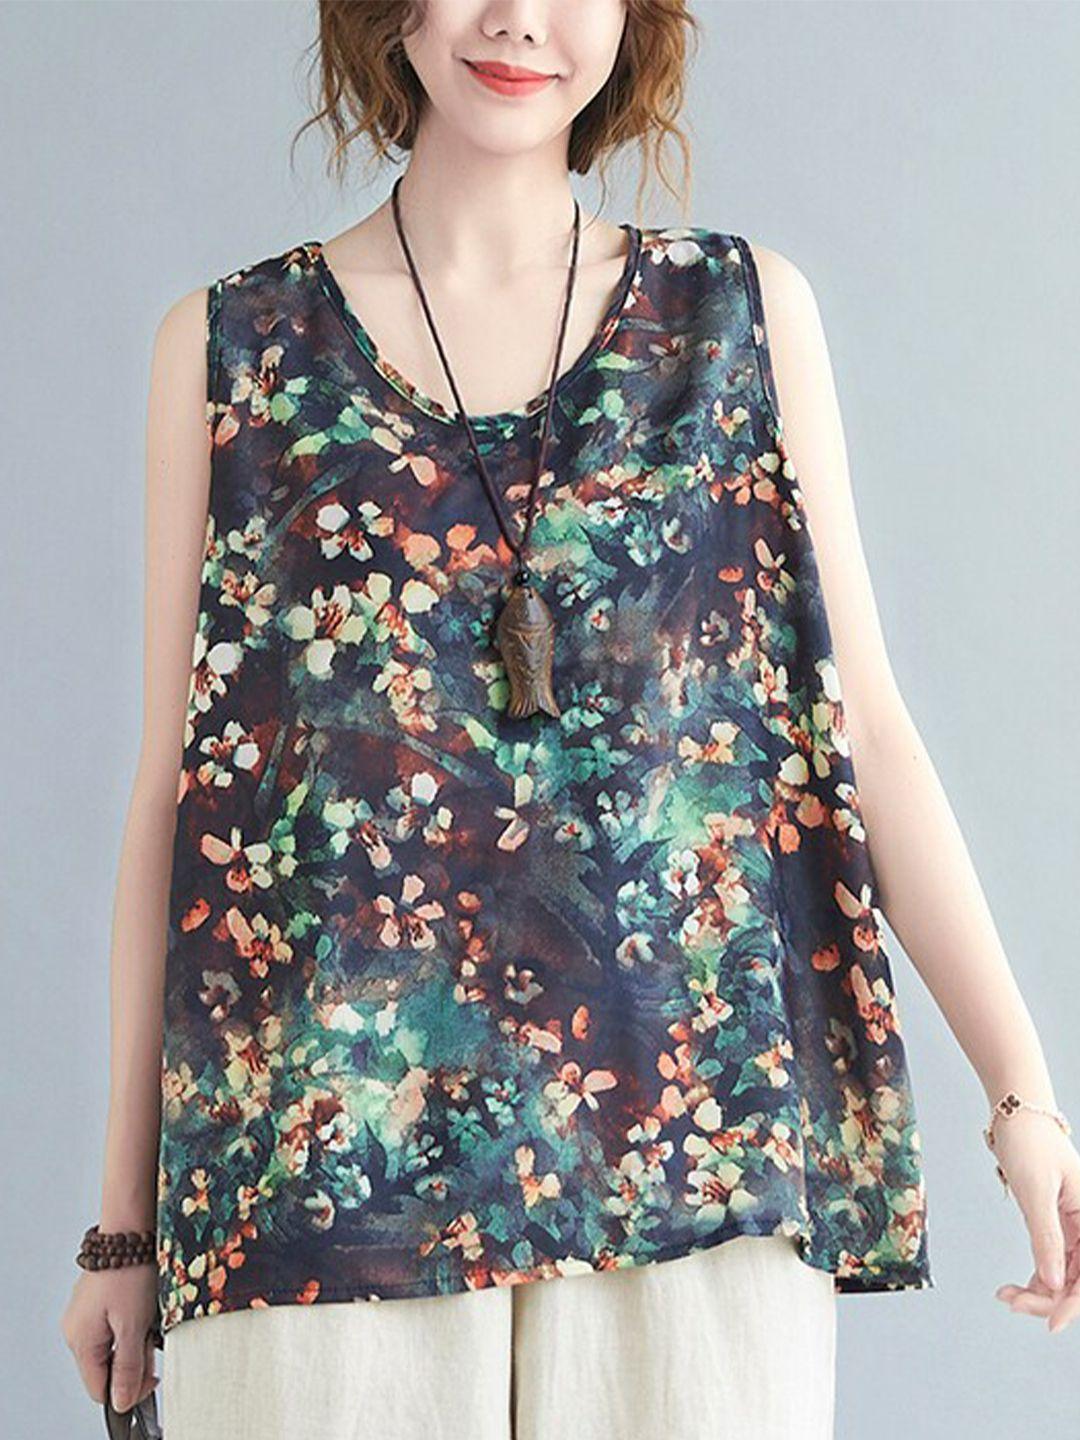 jc mode floral printed round neck sleeveless a-line top